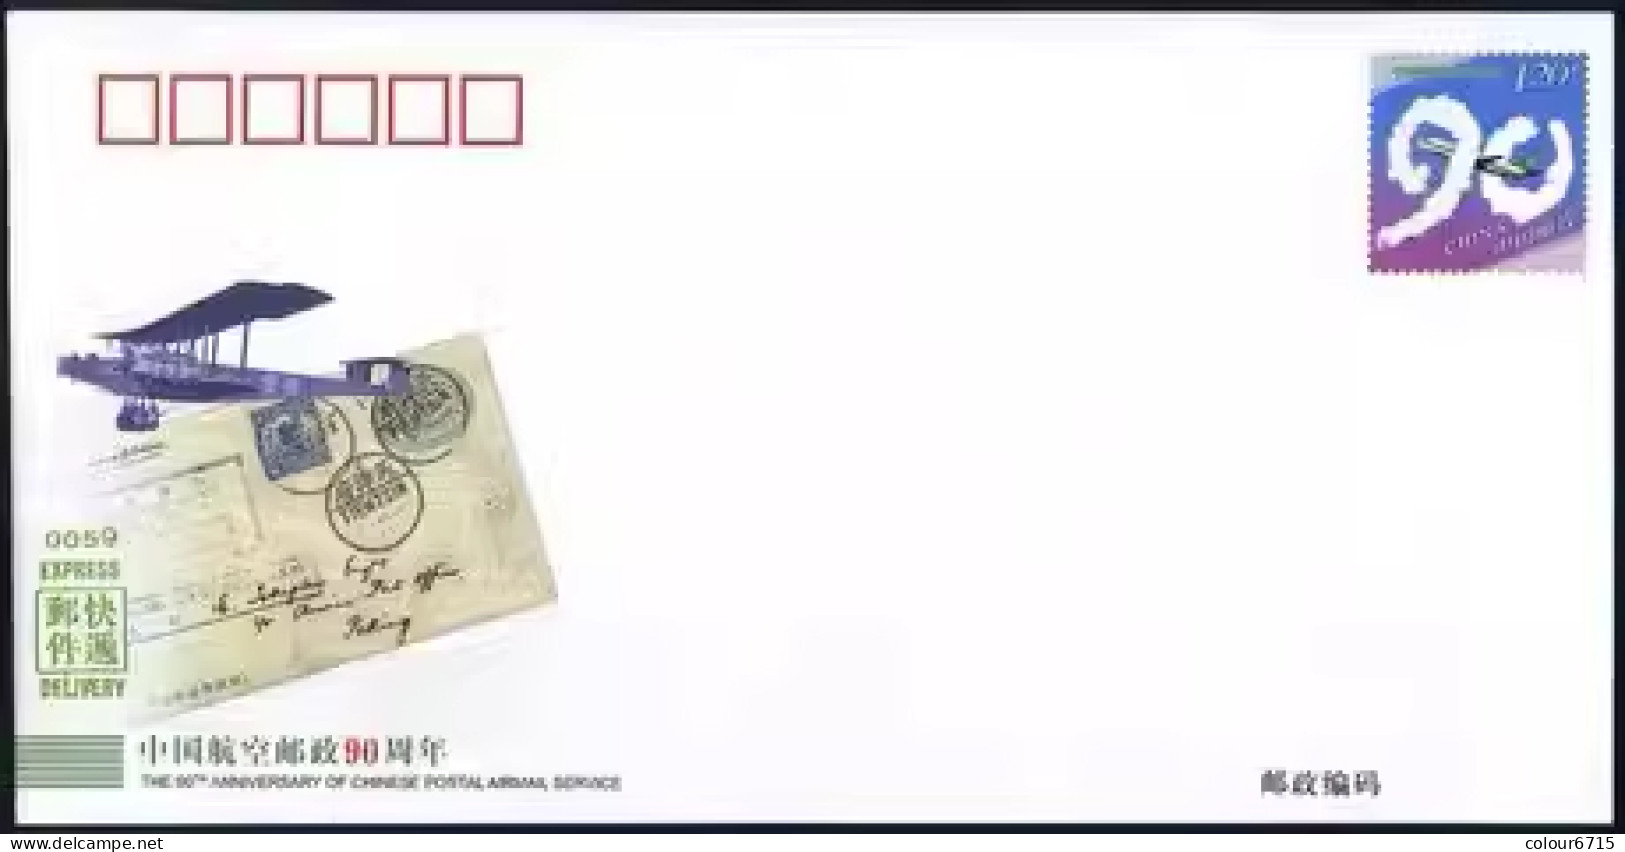 China Postal Cover 2010/JF94 The 90th Anniversary Of Chinese Postal Airmail Service 1v MNH - Enveloppes